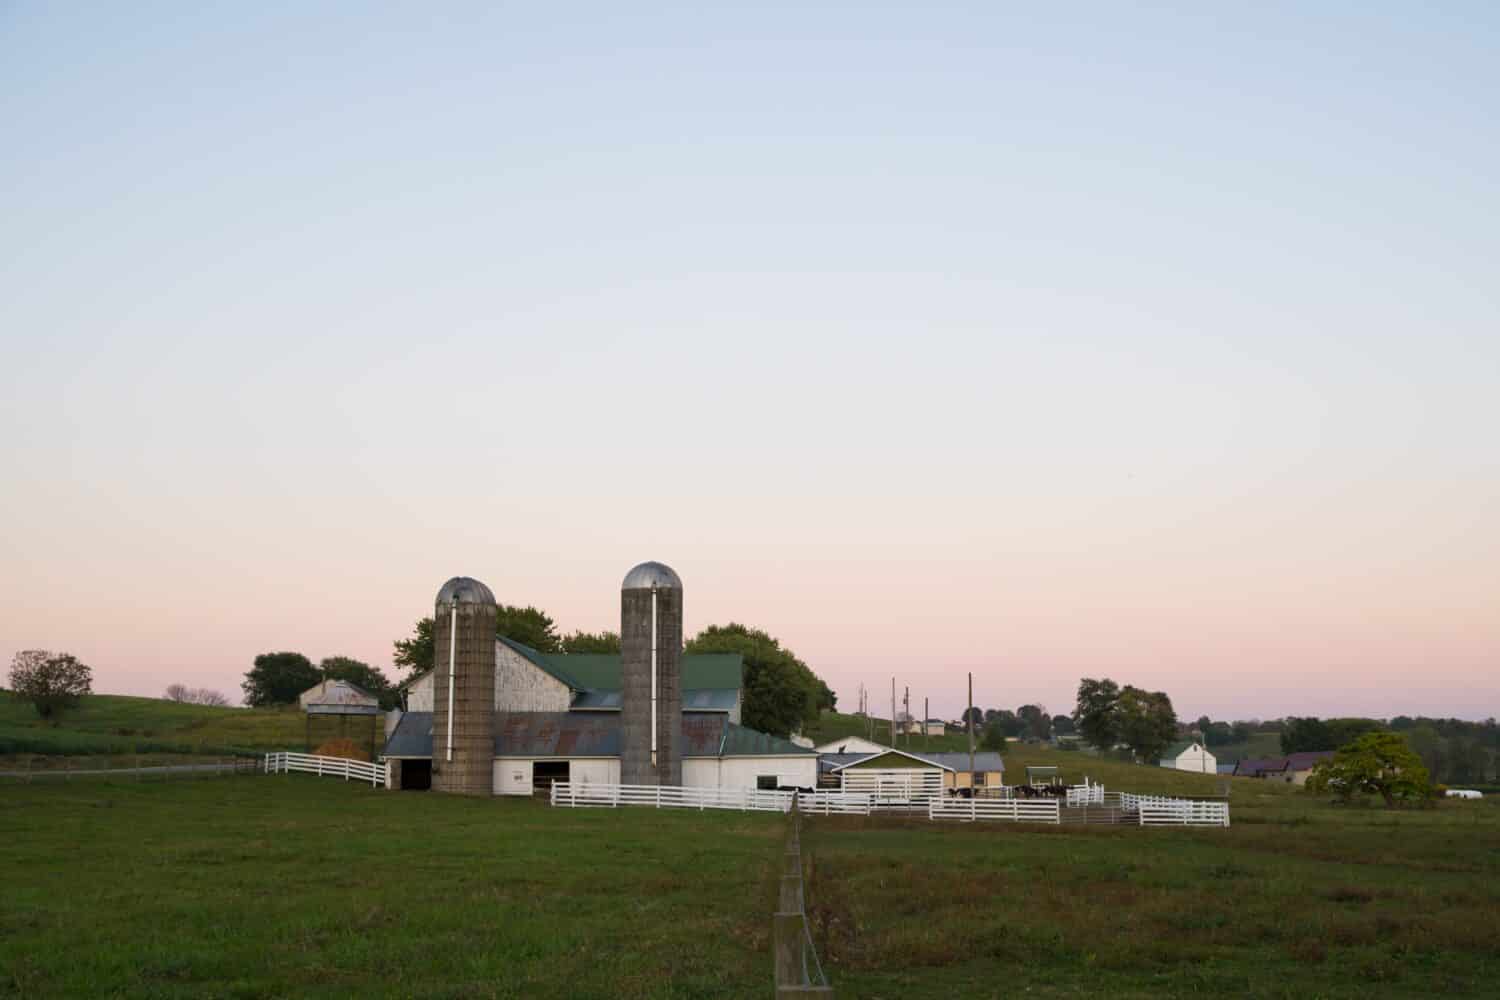 Evening settles over a rural farm scene as cattle feed on hay on an Amish farm near Sugarcreek, Ohio. Twin silos and a corn granary can be seen along with a white, board fence enclosing the yard.